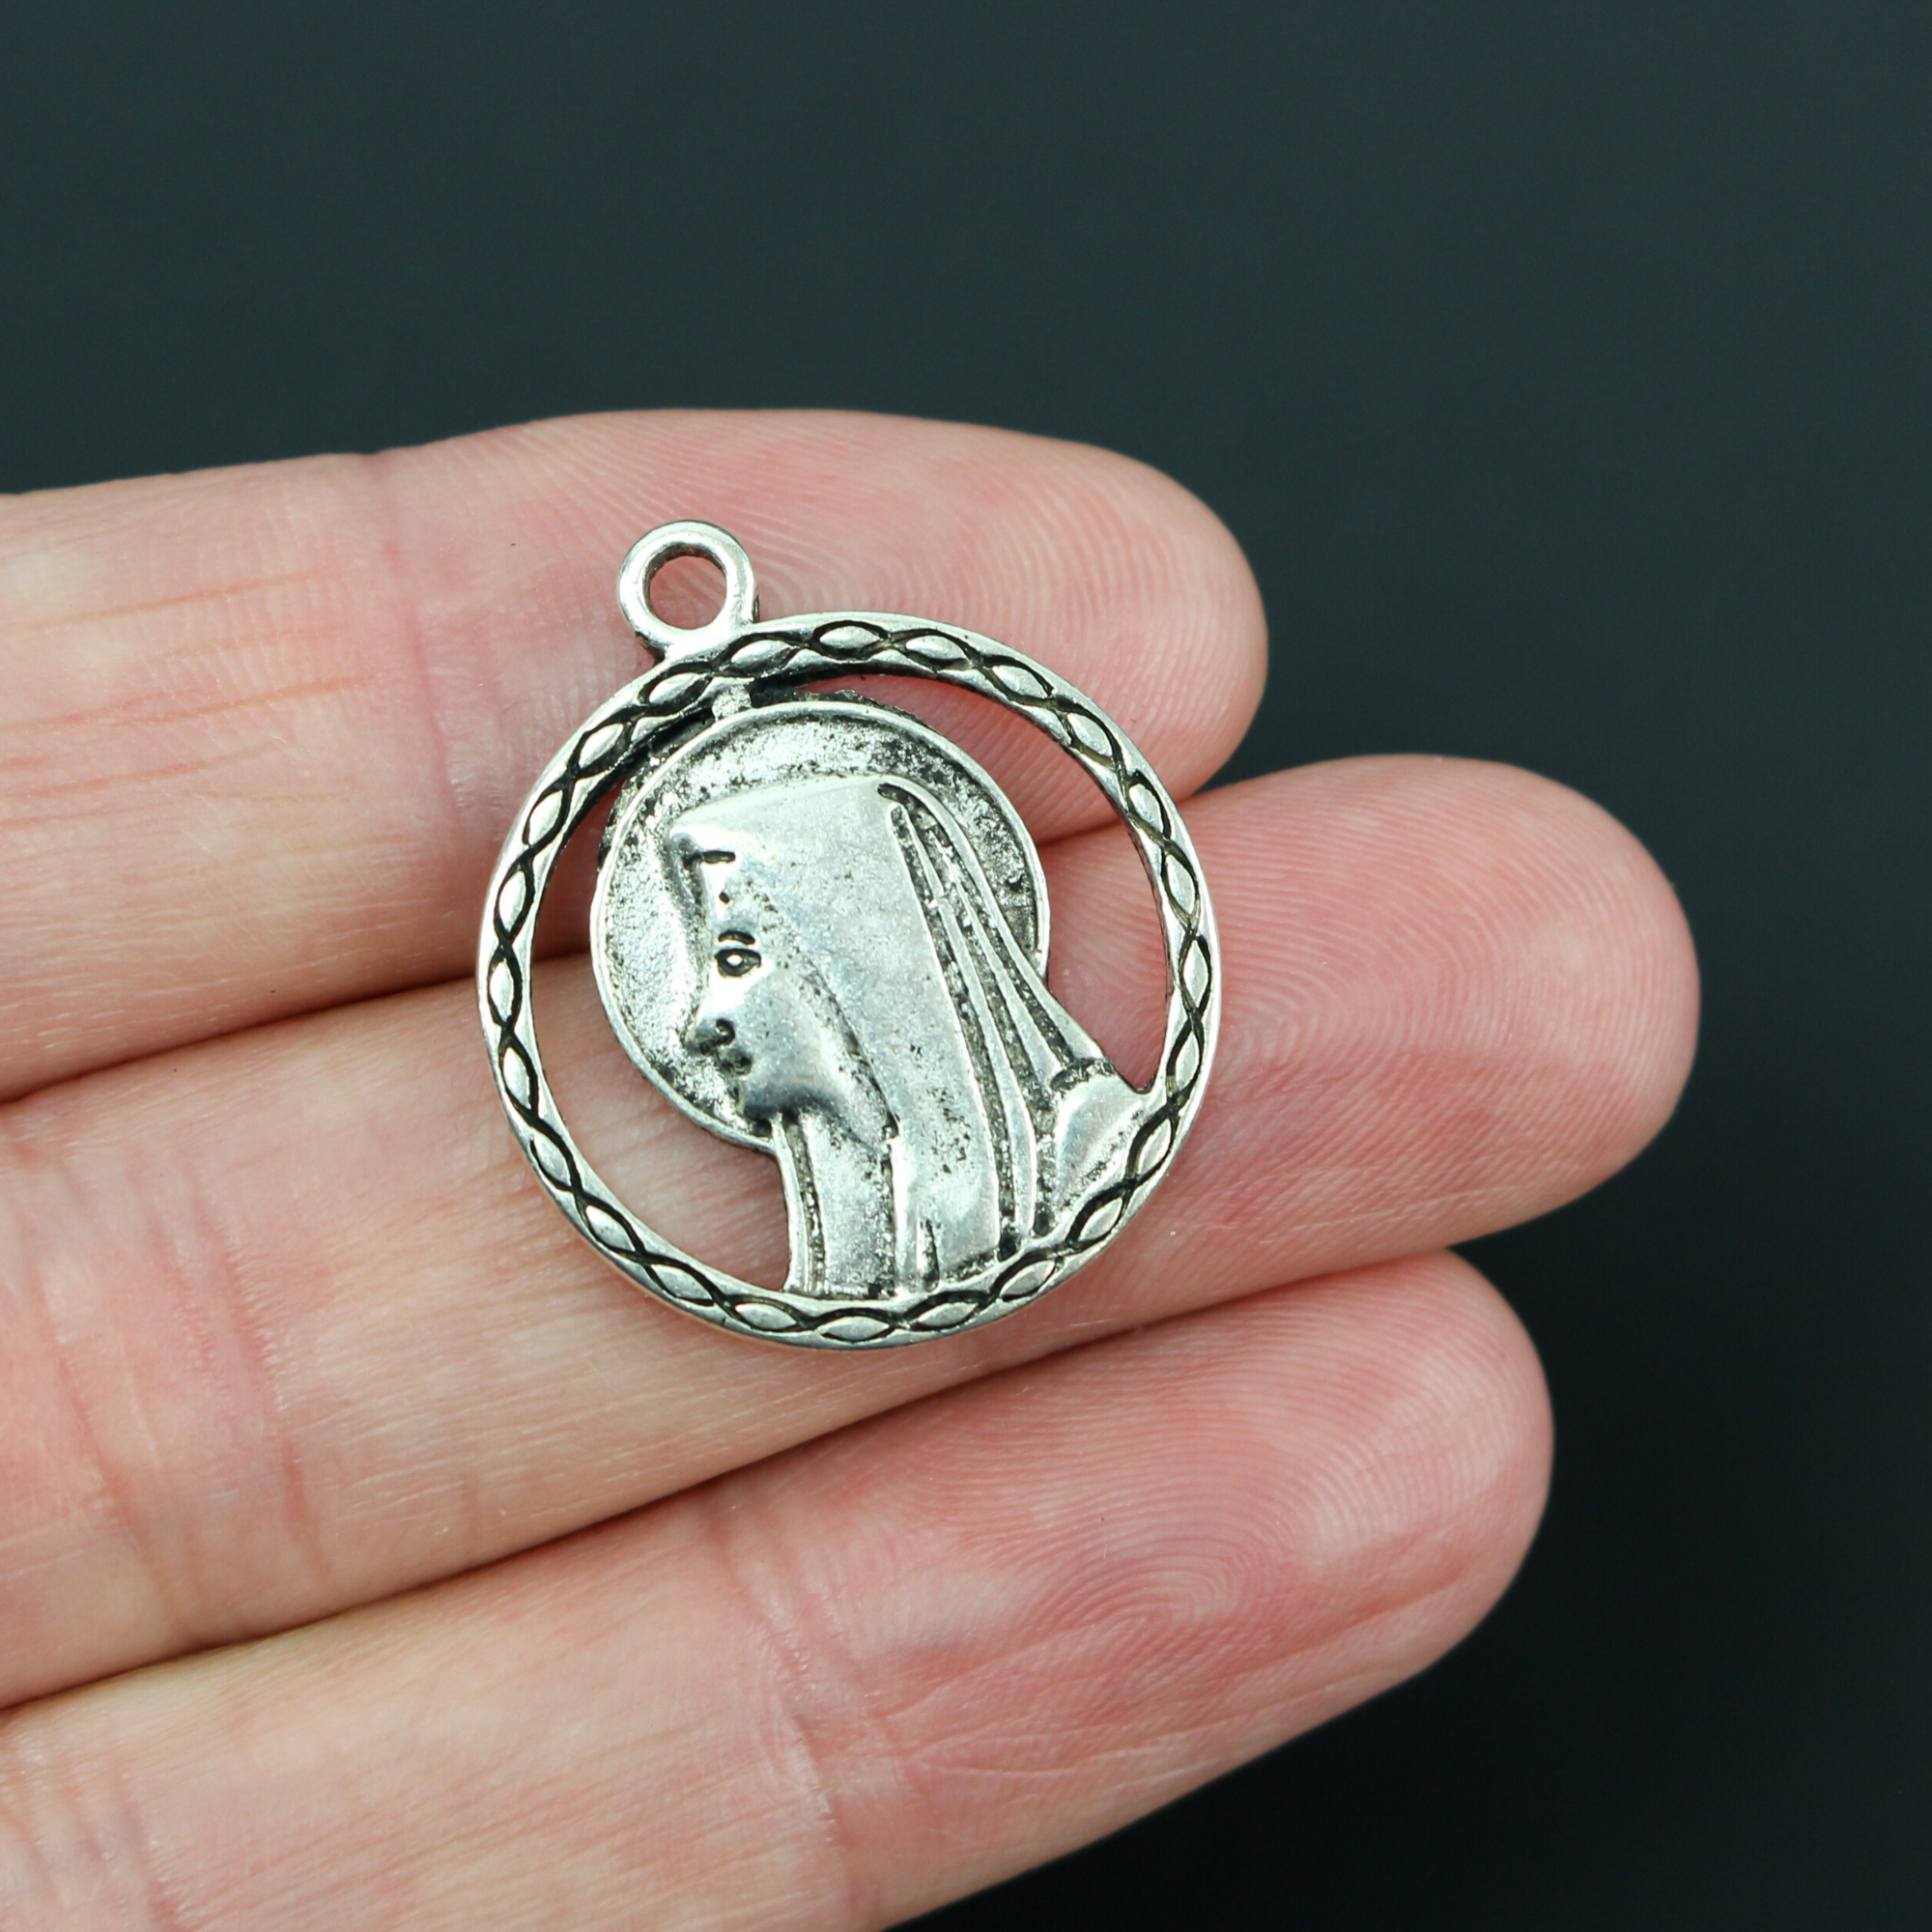 our lady of lourdes pendant with a cutout filigree design